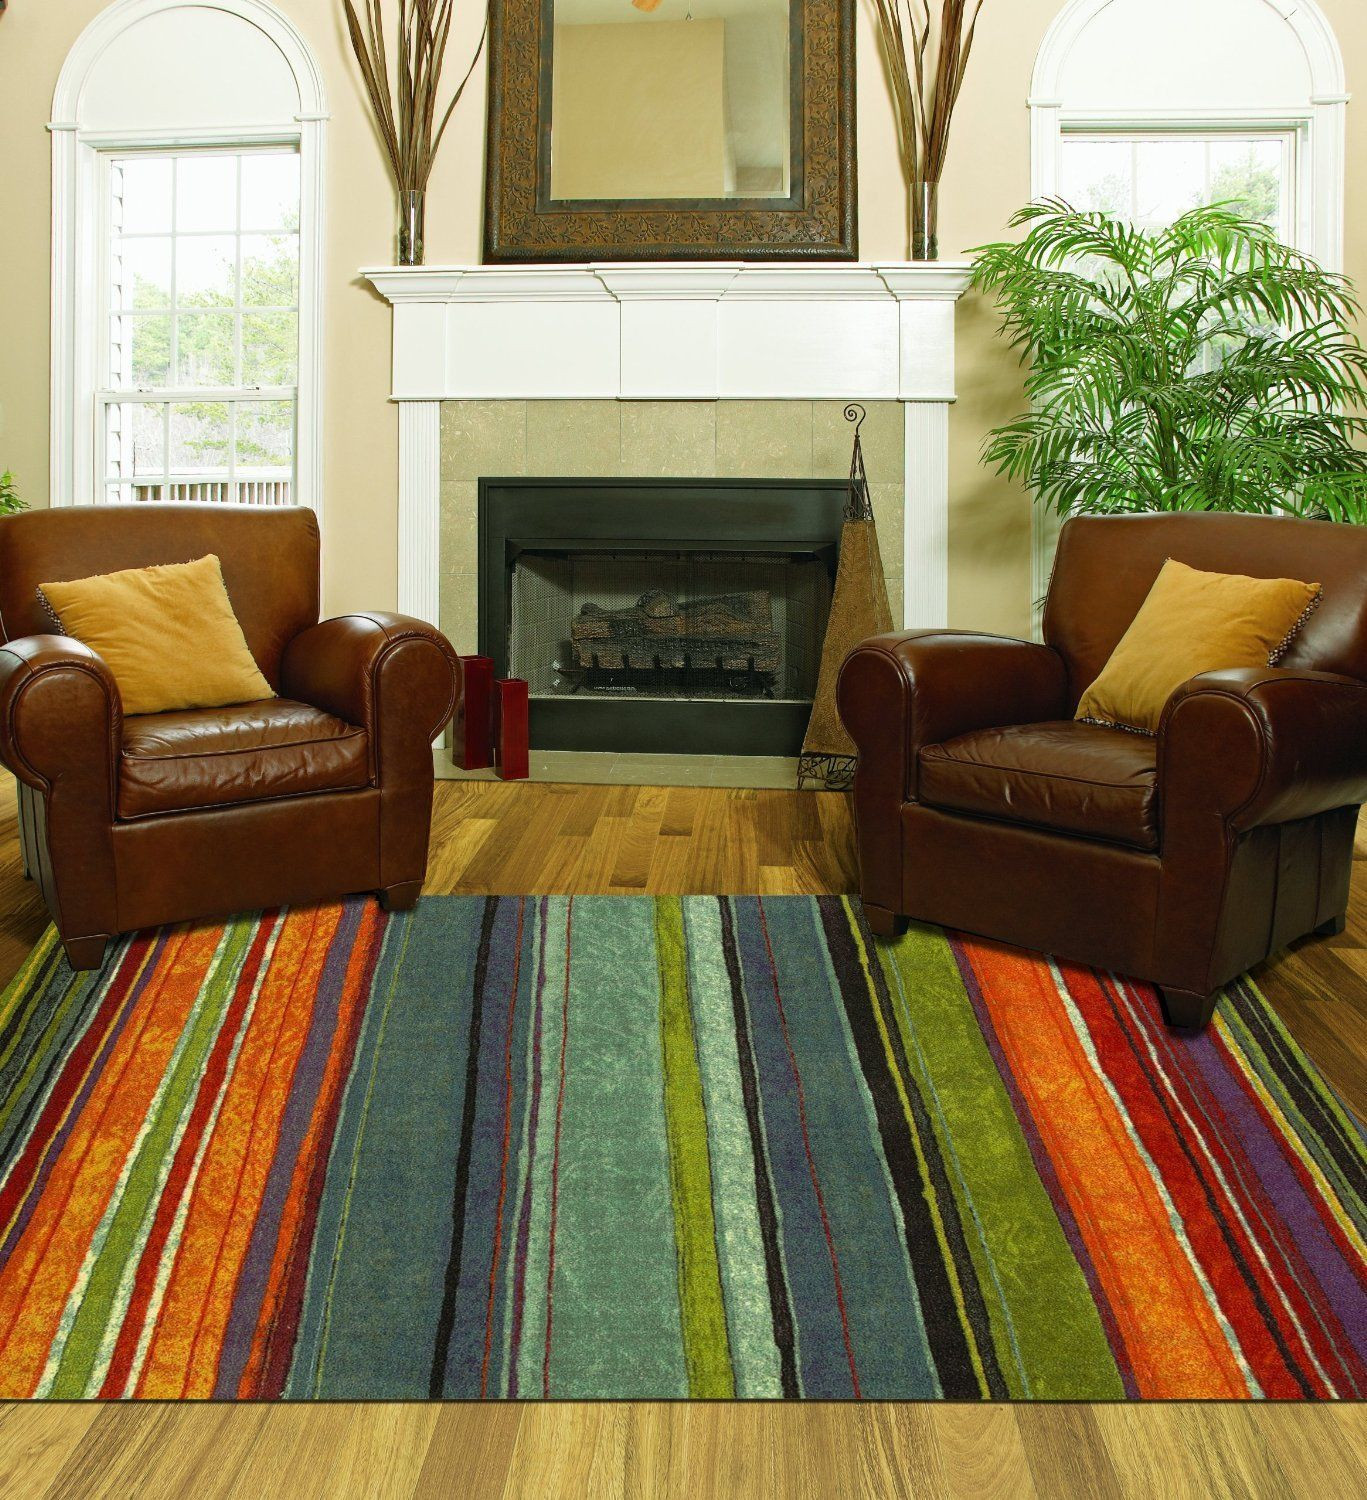 Living Room Area Rugs 8X10
 Area Rug Colorful 8x10 Living Room Size Carpet Home